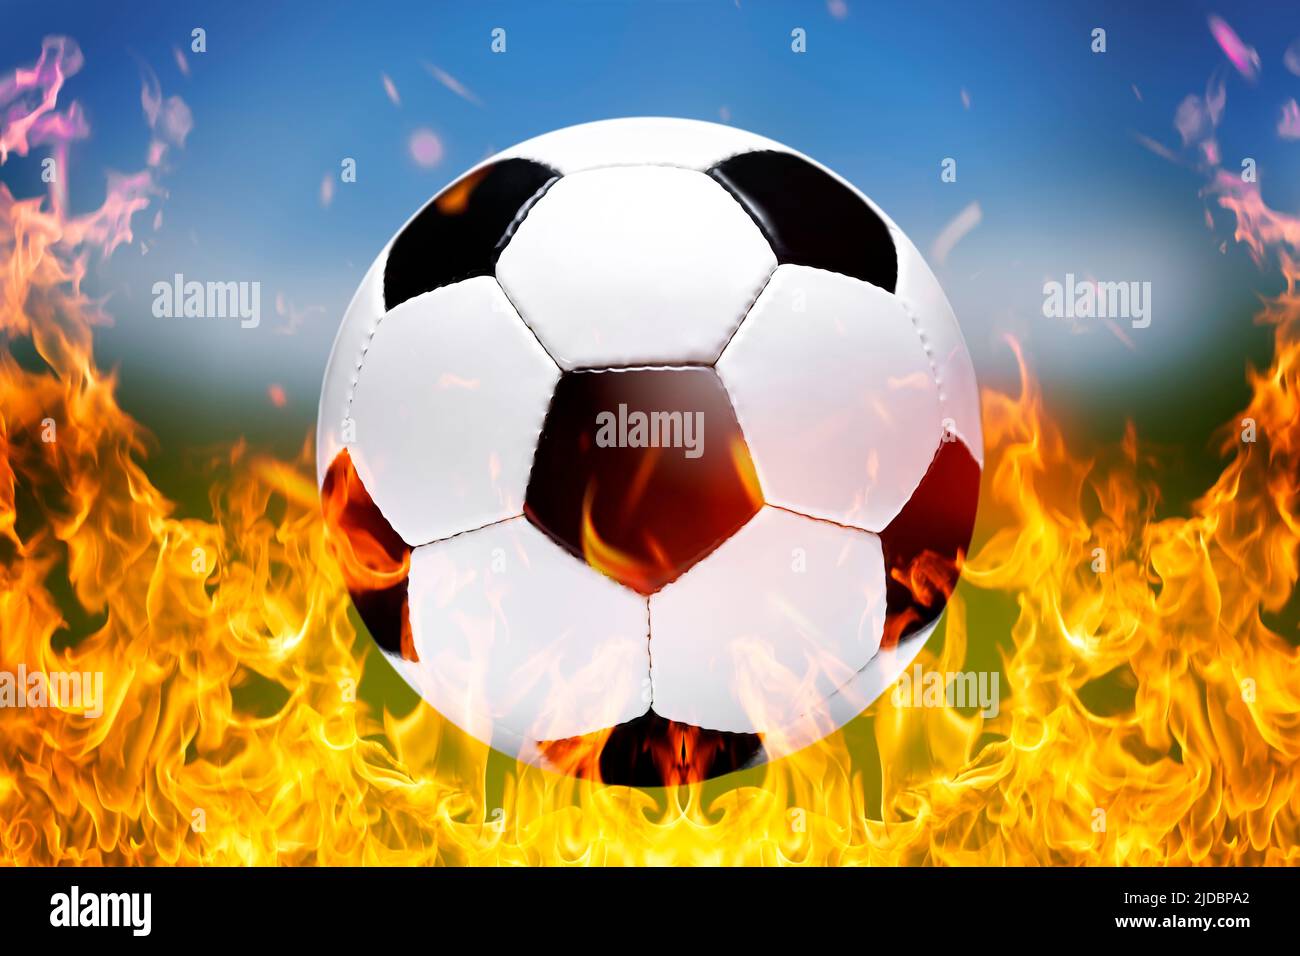 Soccer ball and flames Stock Photo